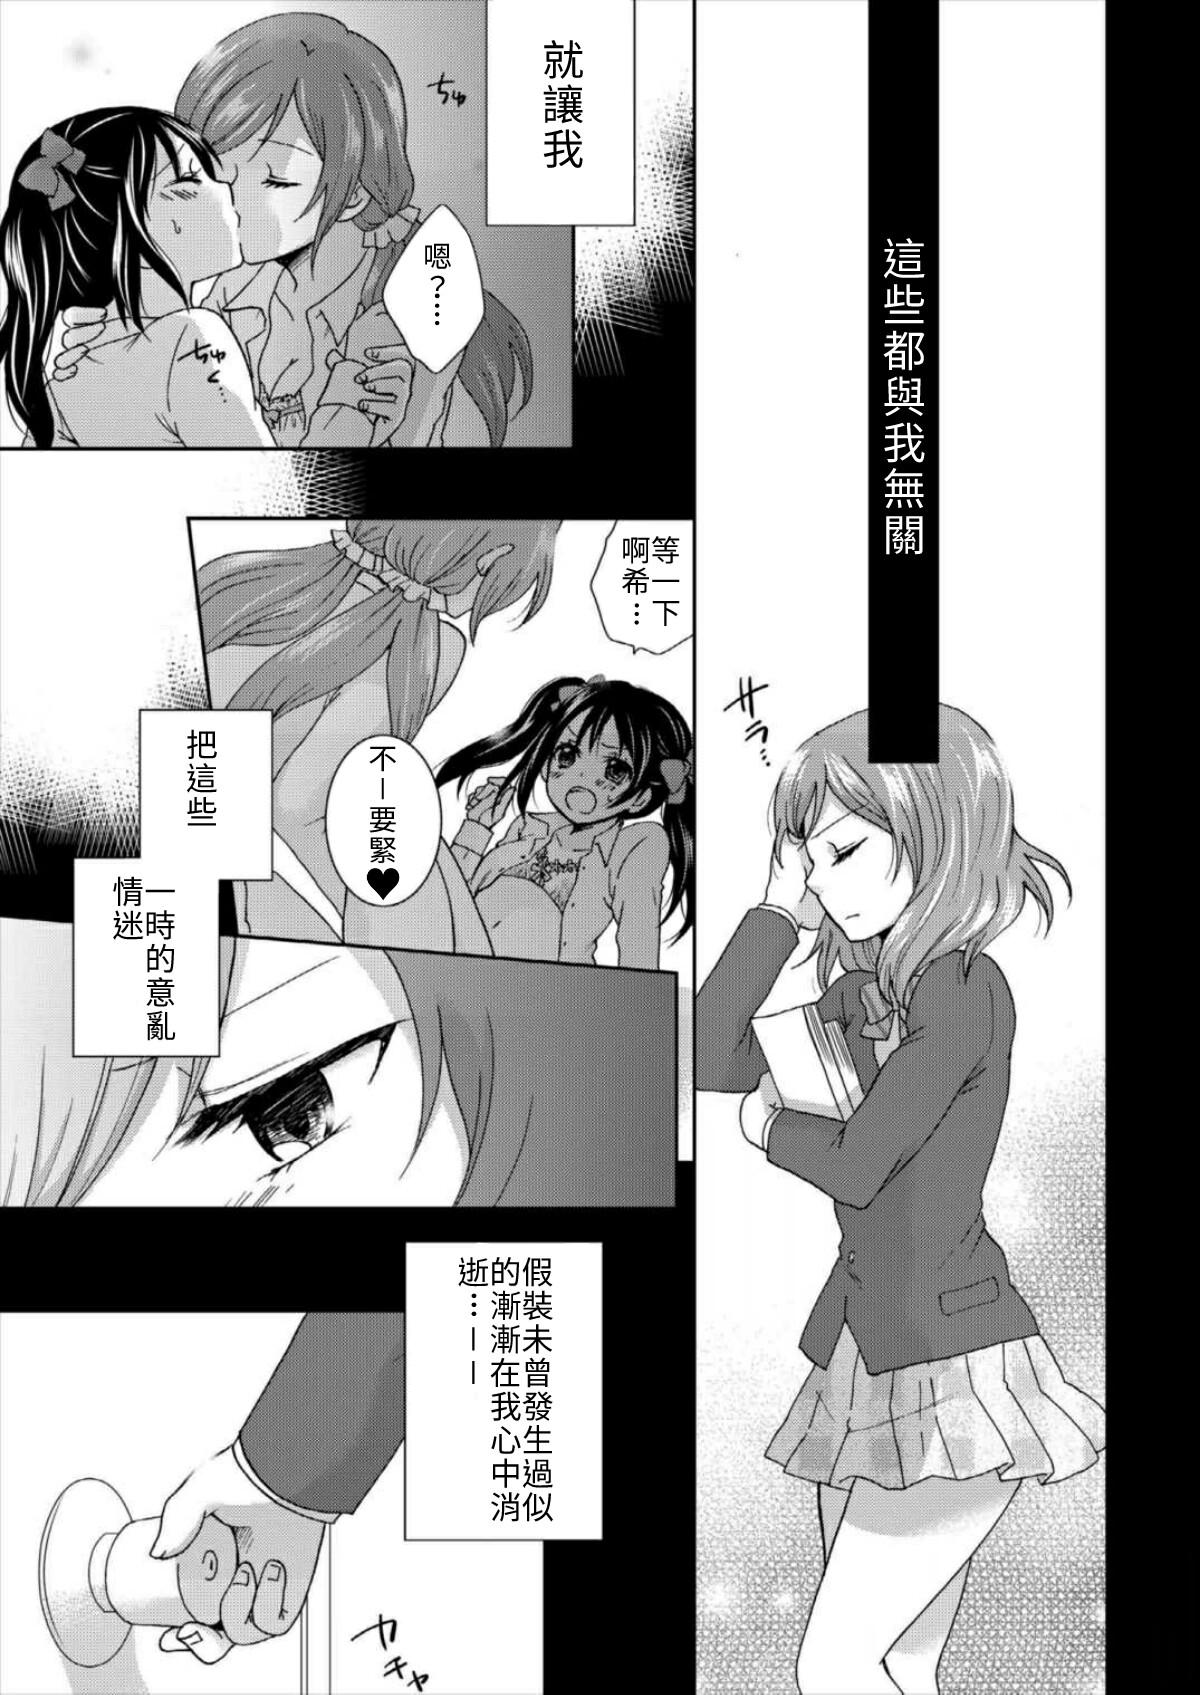 Spooning Yuri Live! - Love live Real Amateur - Page 10